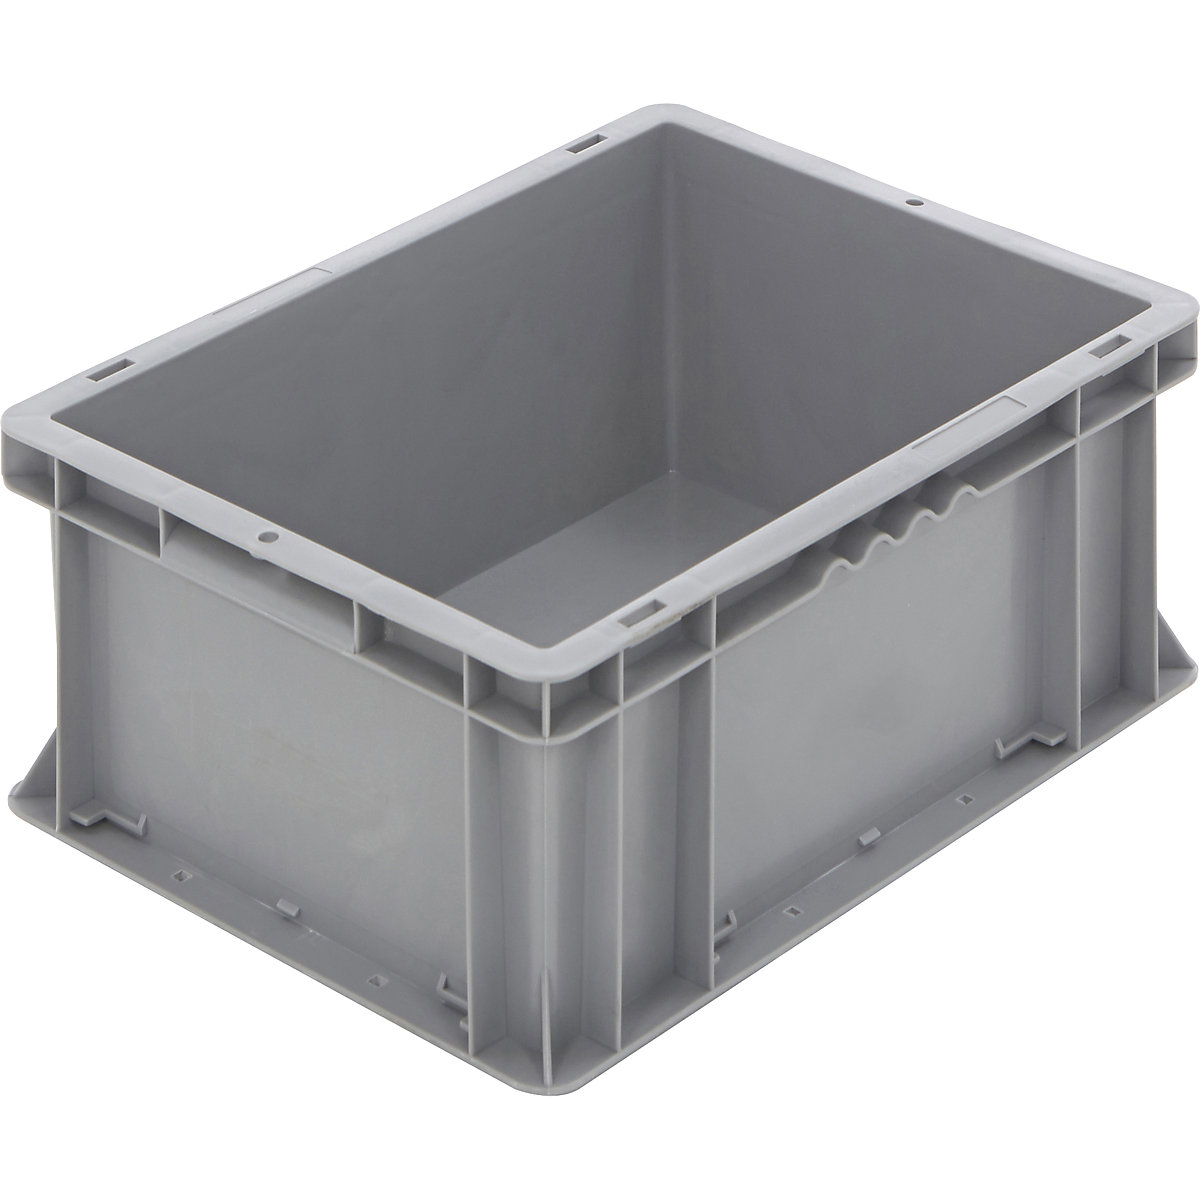 Euro stacking container, capacity 14 litre, grey-7